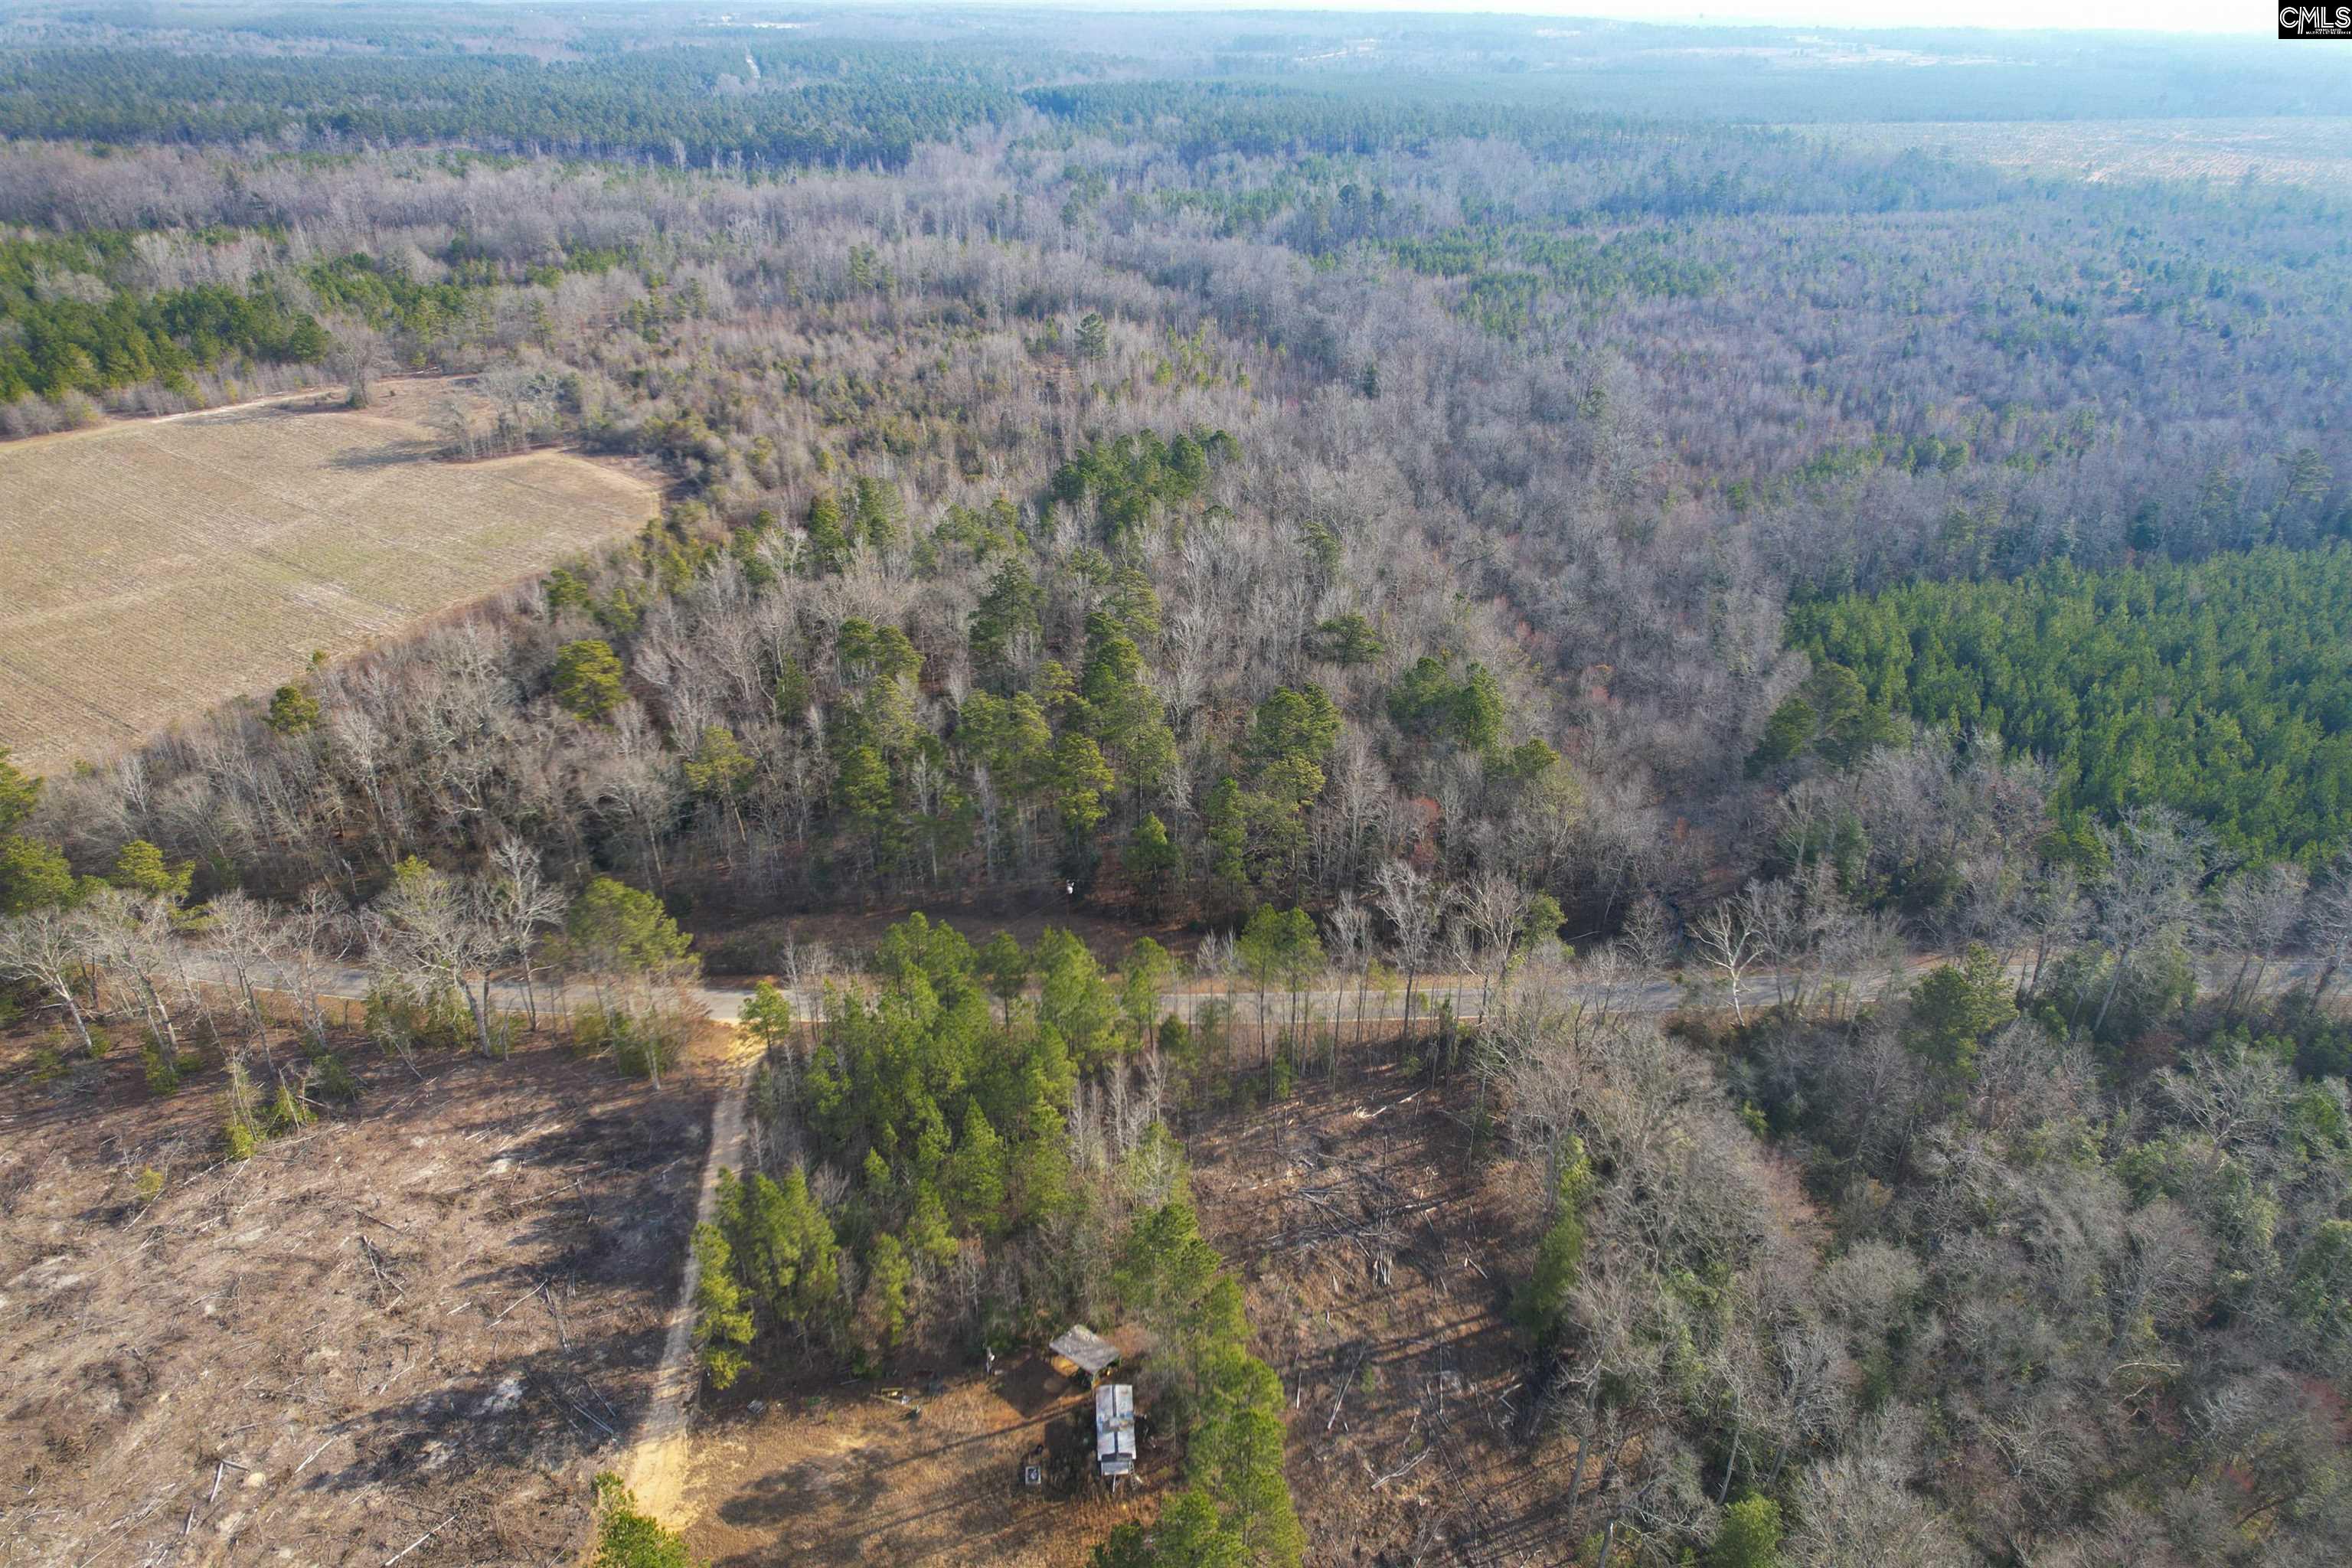  Lots For Sale - 703 Neds Creek, Kershaw, SC - 25 